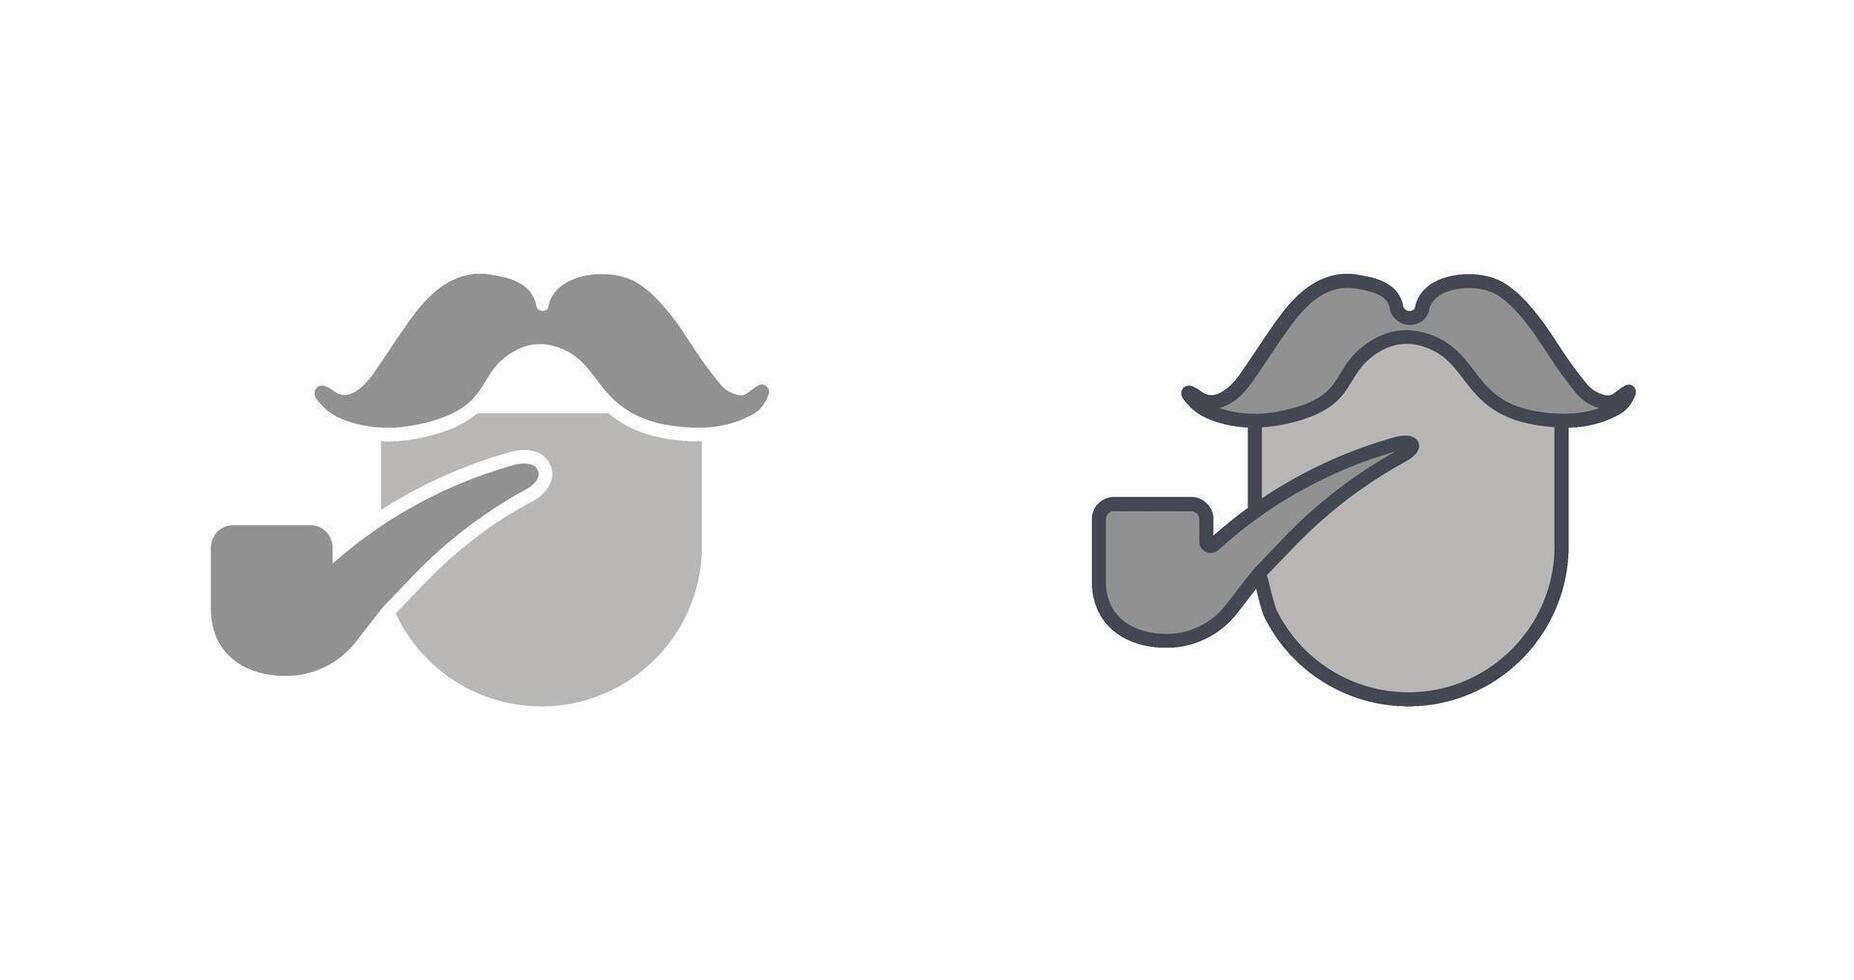 Pirate With Smoking Pipe Icon Design vector